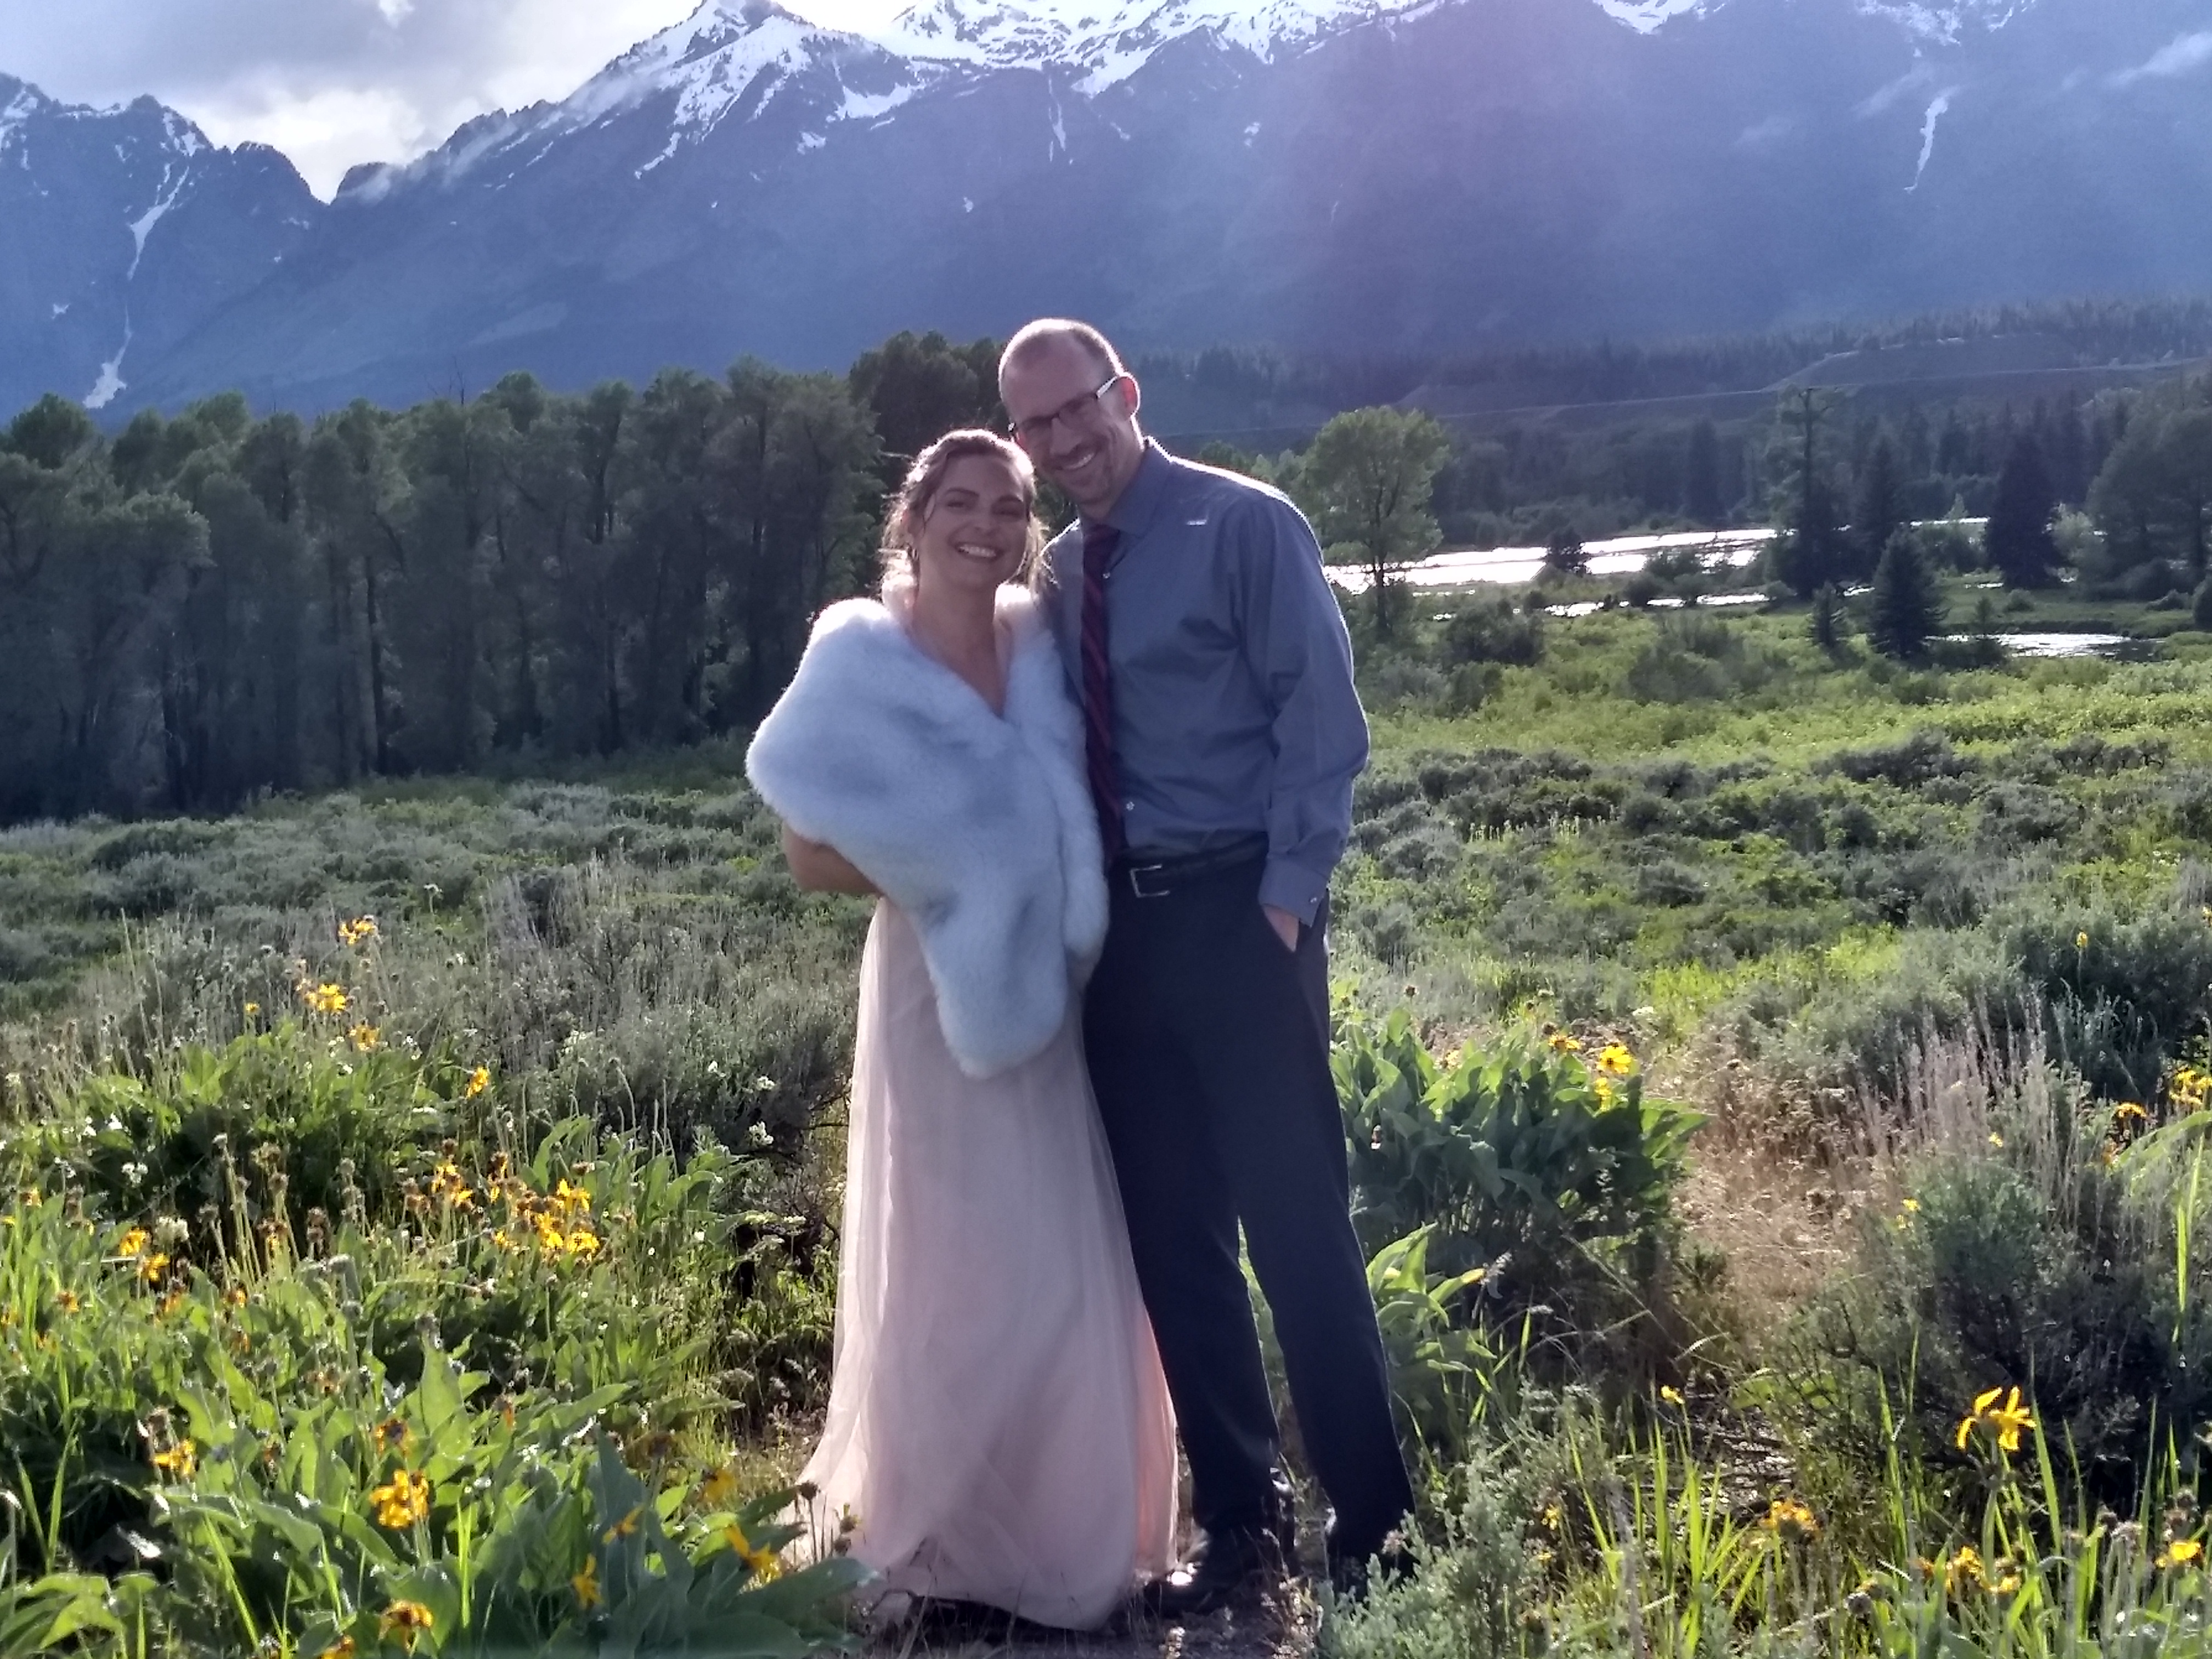 Dave and Krista looking very couple-y at the wedding in Wyoming where they met, with the Tetons in the background.